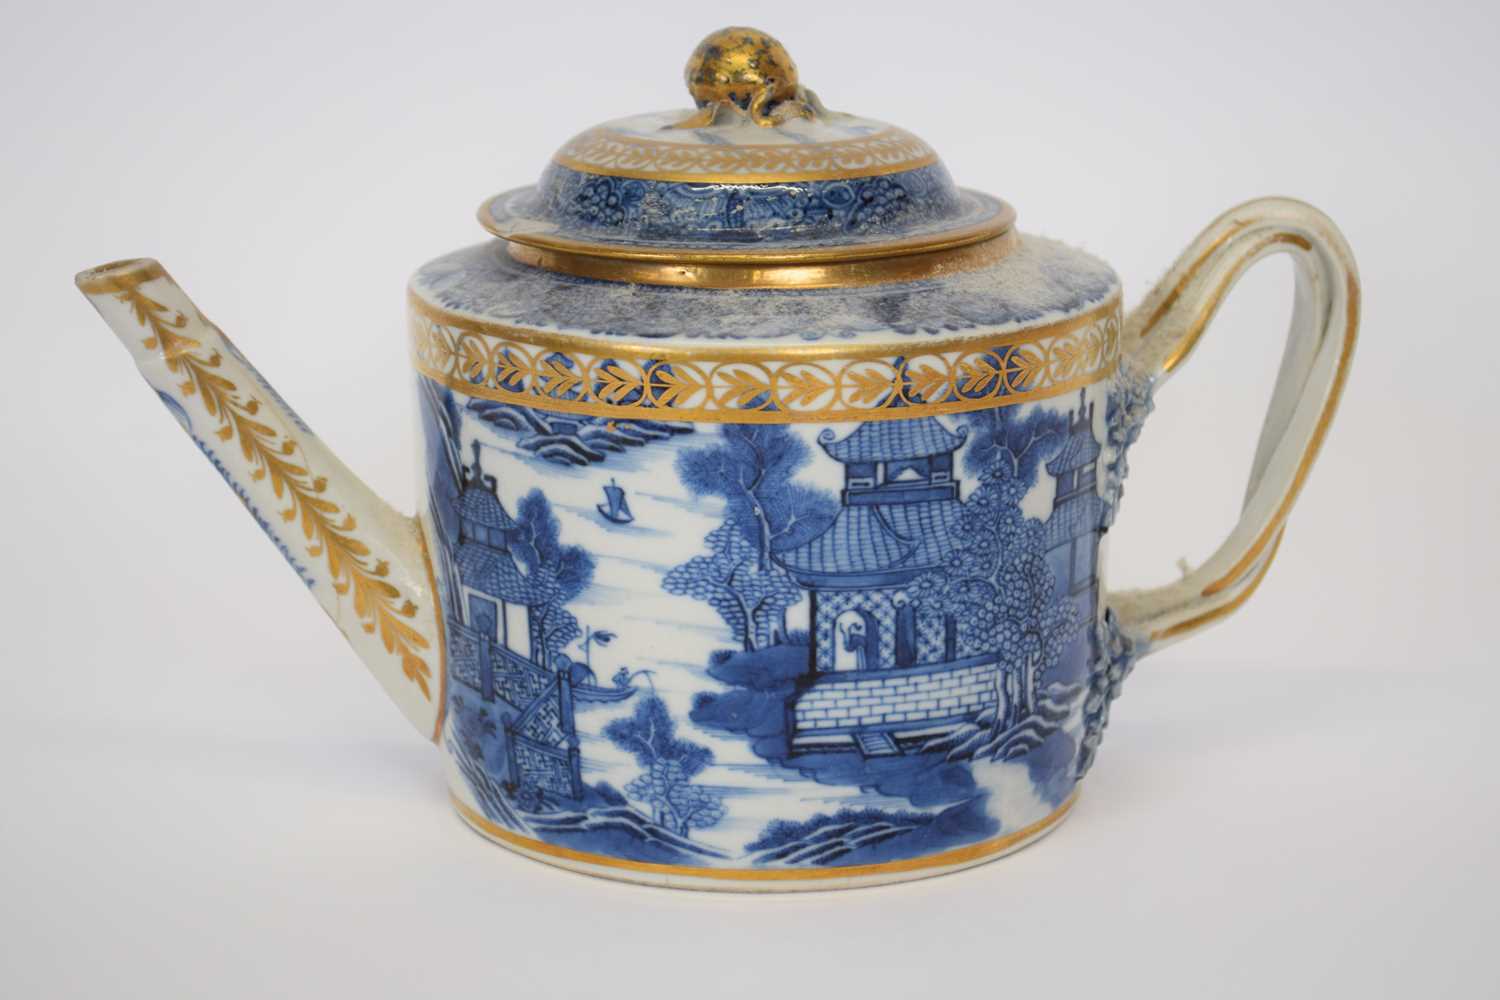 Late 18th century Chinese porcelain teapot with blue and white design and gilt overglaze